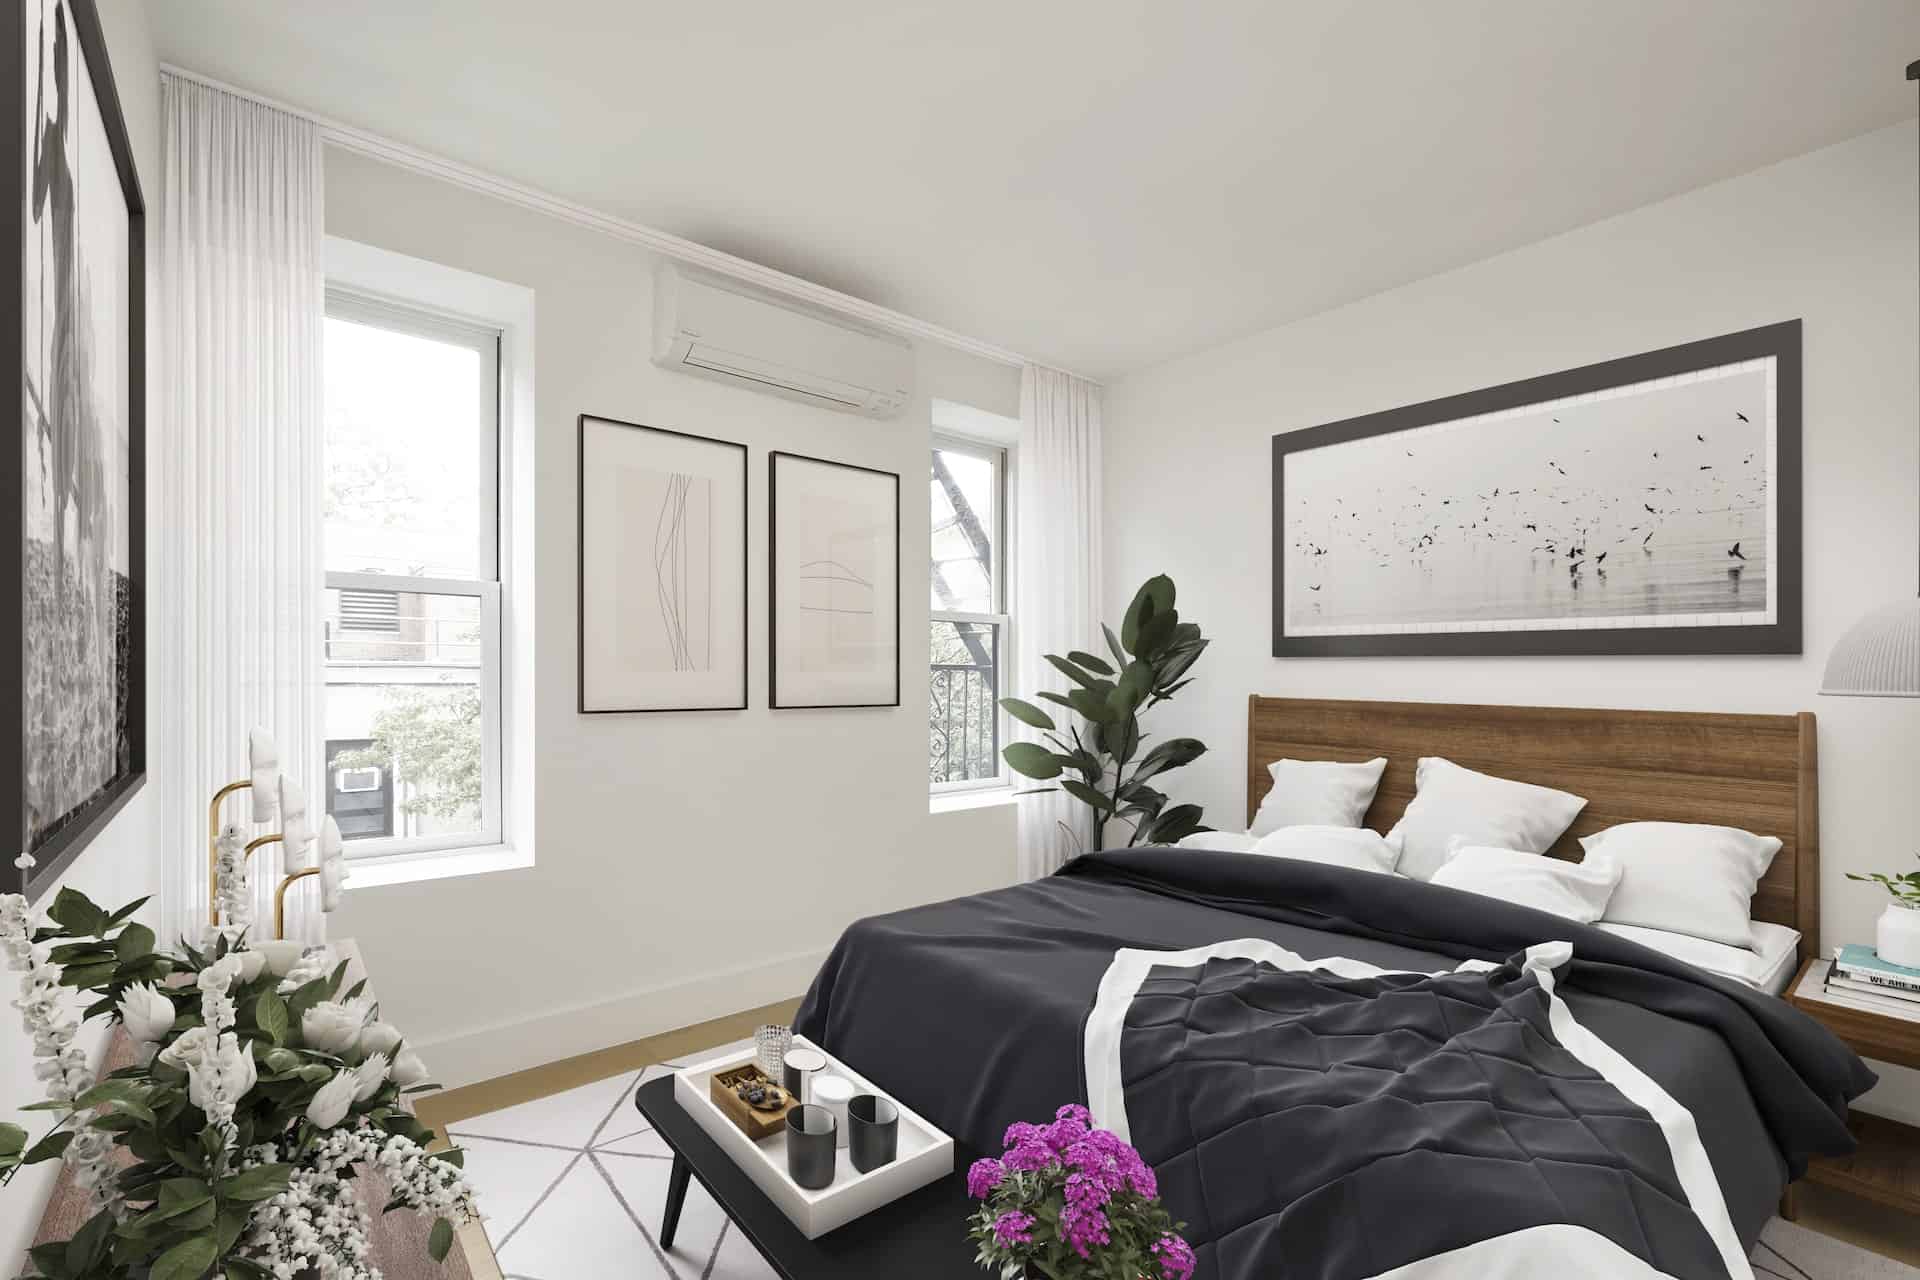 Bedroom at 236 West 10th Street apartments in the West Village with a king bed, side table, two windows and hardwood floors.